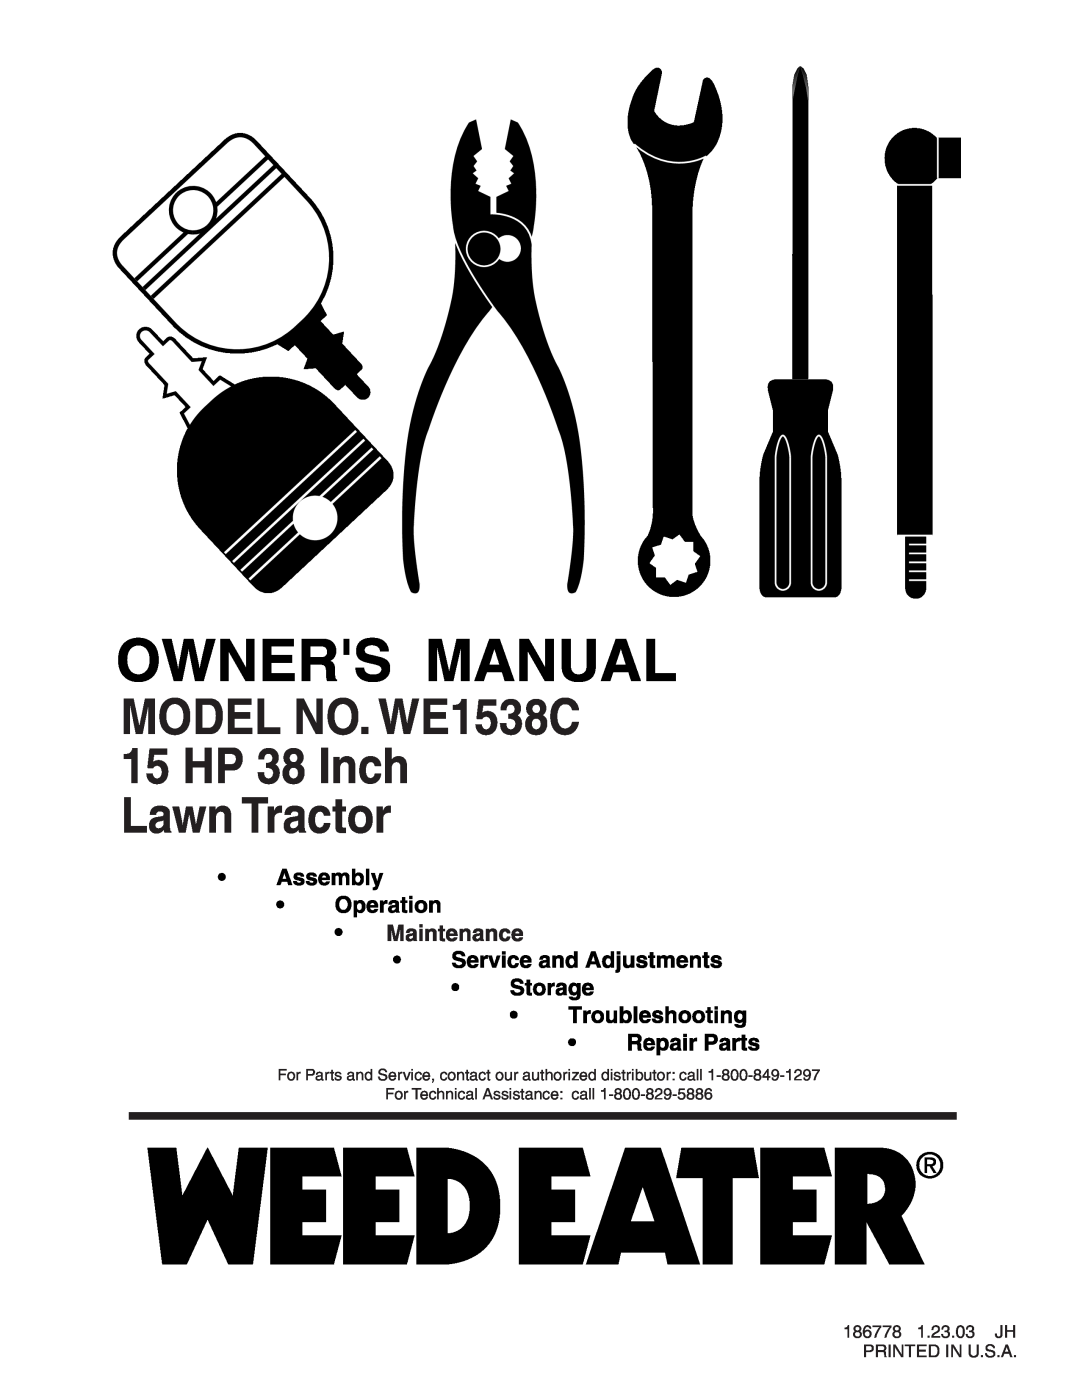 Weed Eater 186778 manual MODEL NO. WE1538C 15 HP 38 Inch Lawn Tractor 